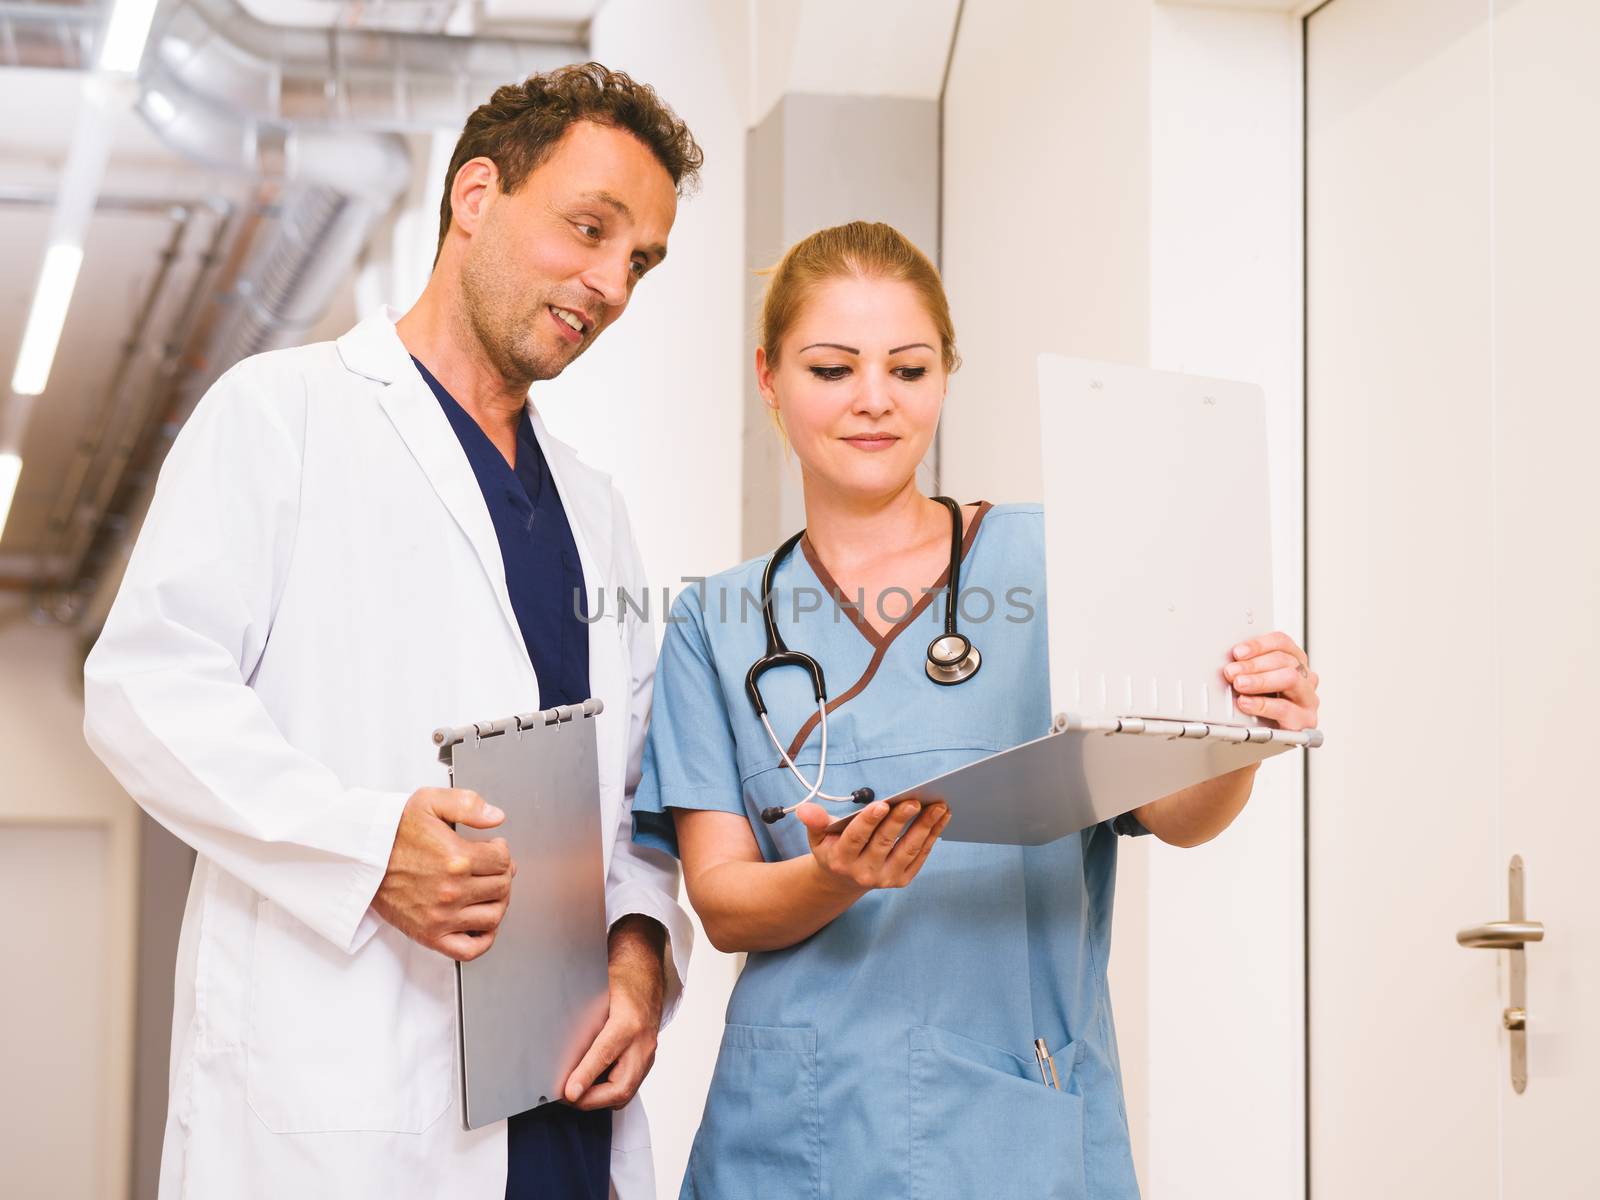 Photo of a nurse and doctor discussing medical charts in the hallway of a hospital.